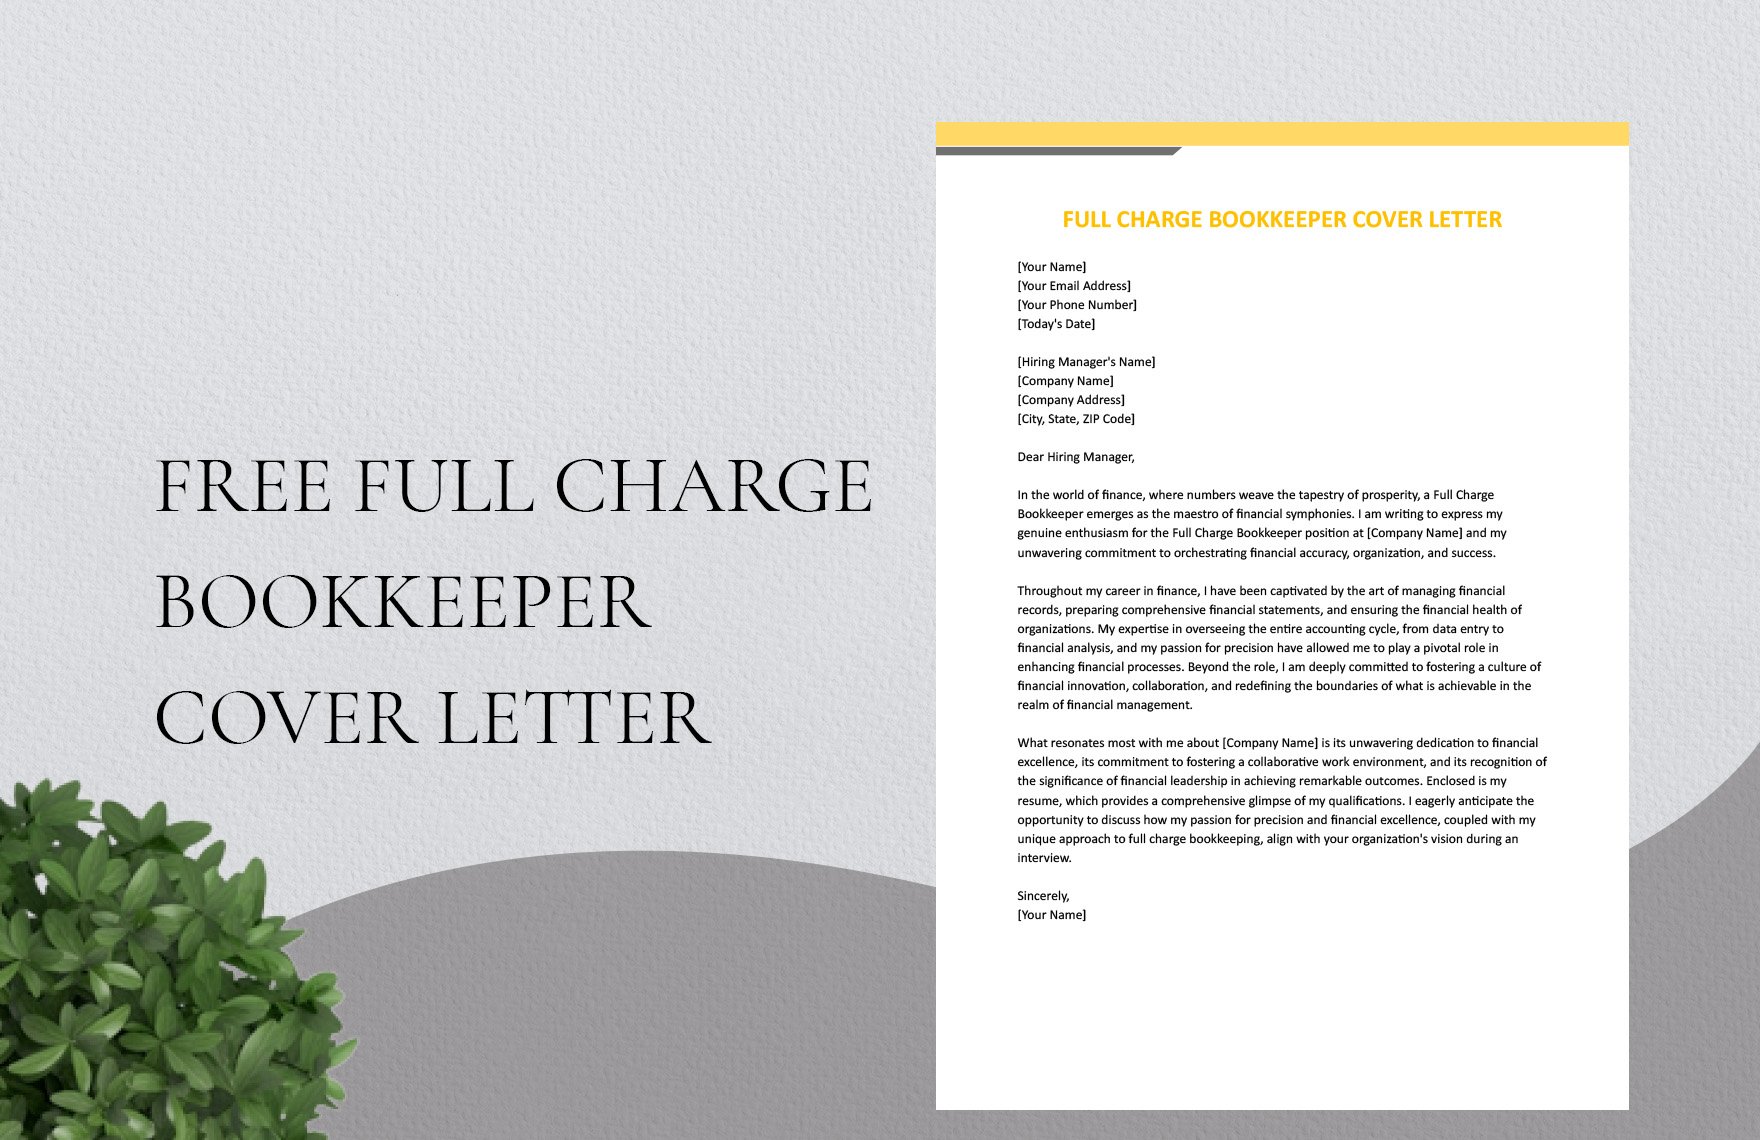 Full Charge Bookkeeper Cover Letter